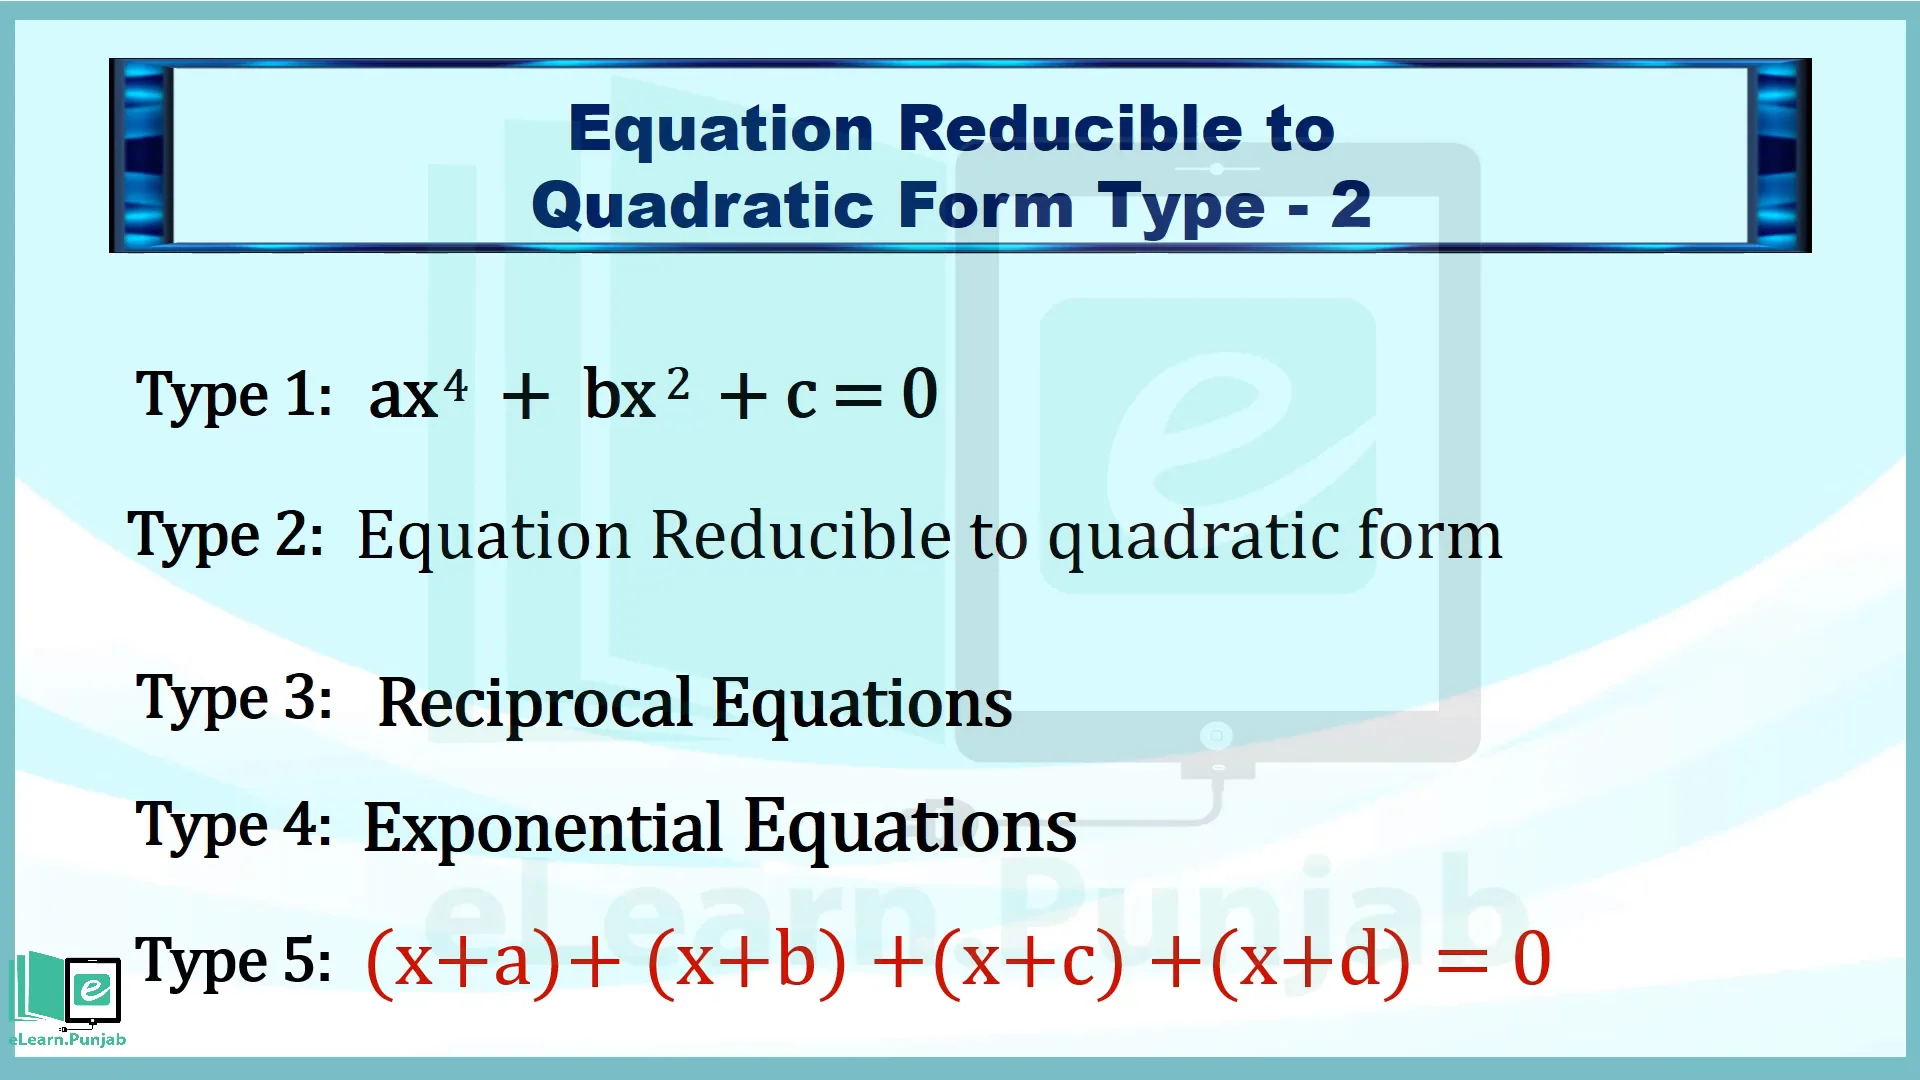 Types of Equation